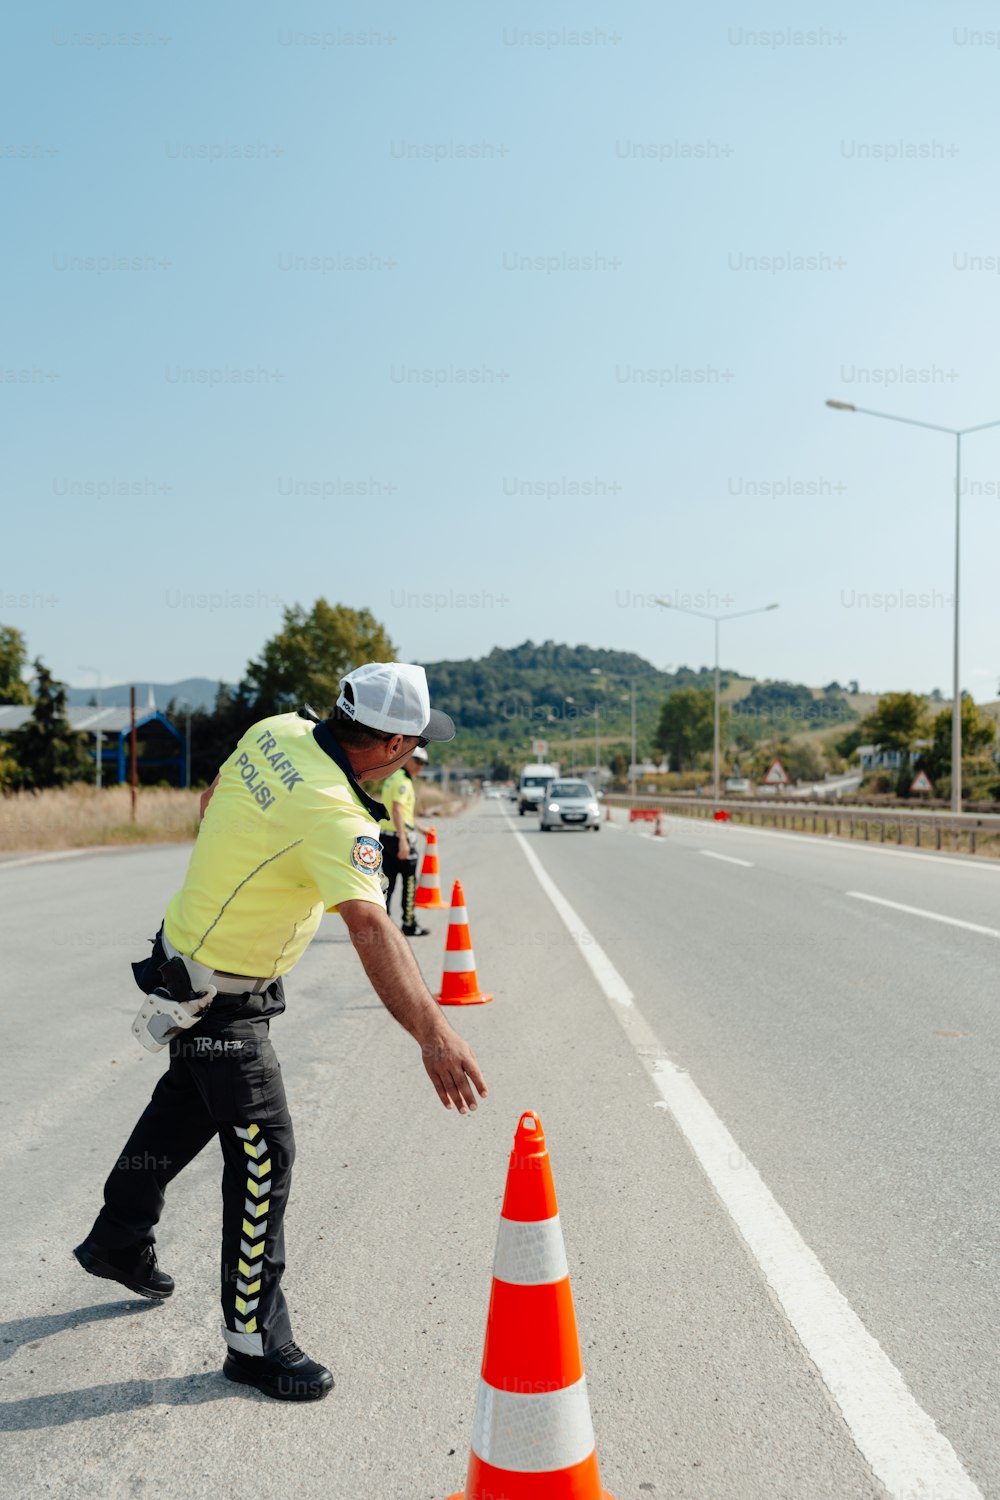 a police officer directing traffic on a highway